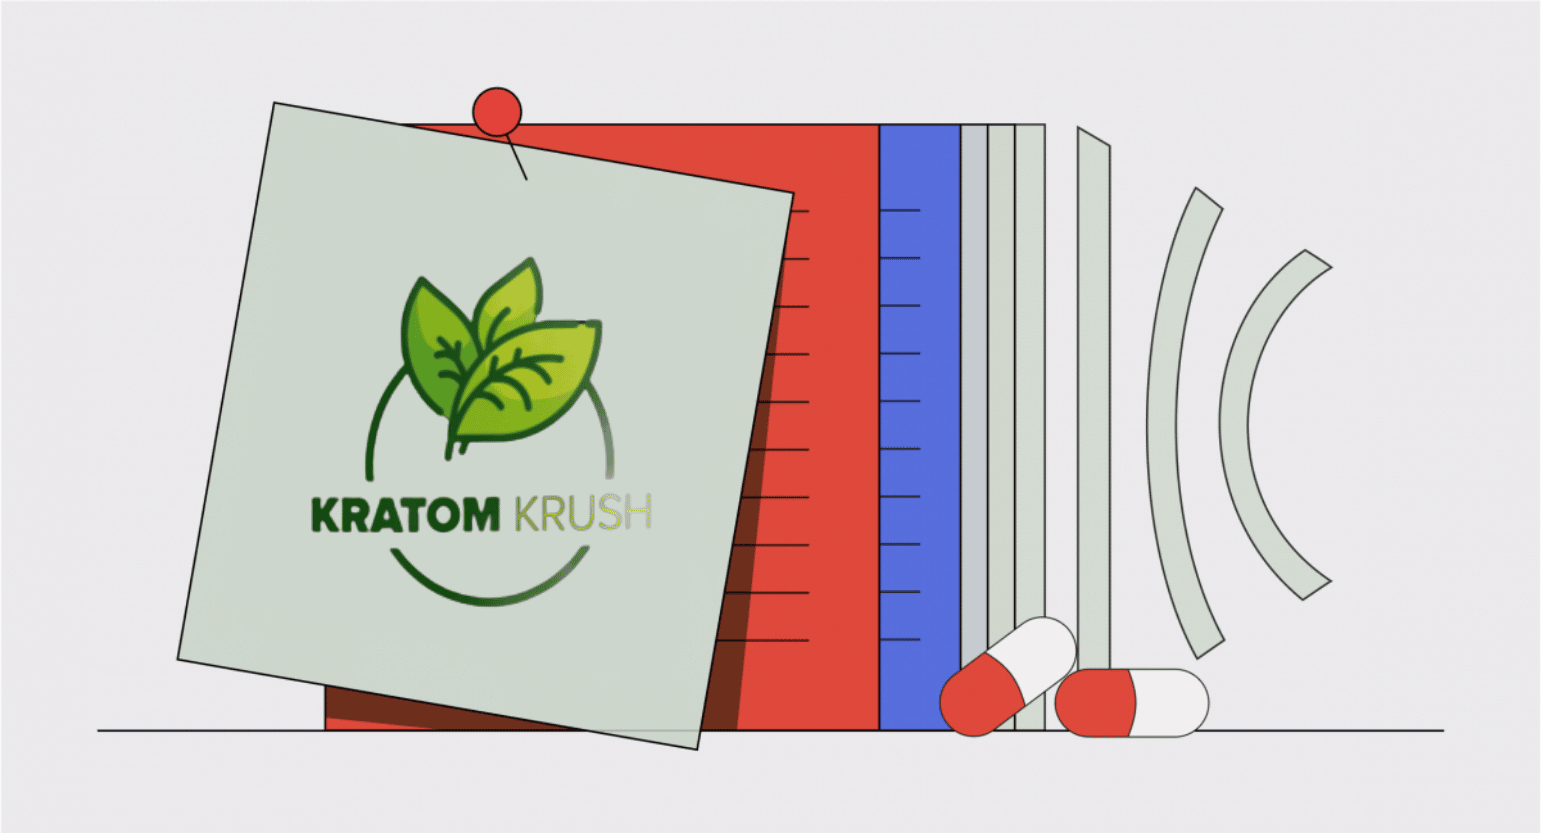 Kratom Krush Vendor Review: Product Selection, Safety, & More